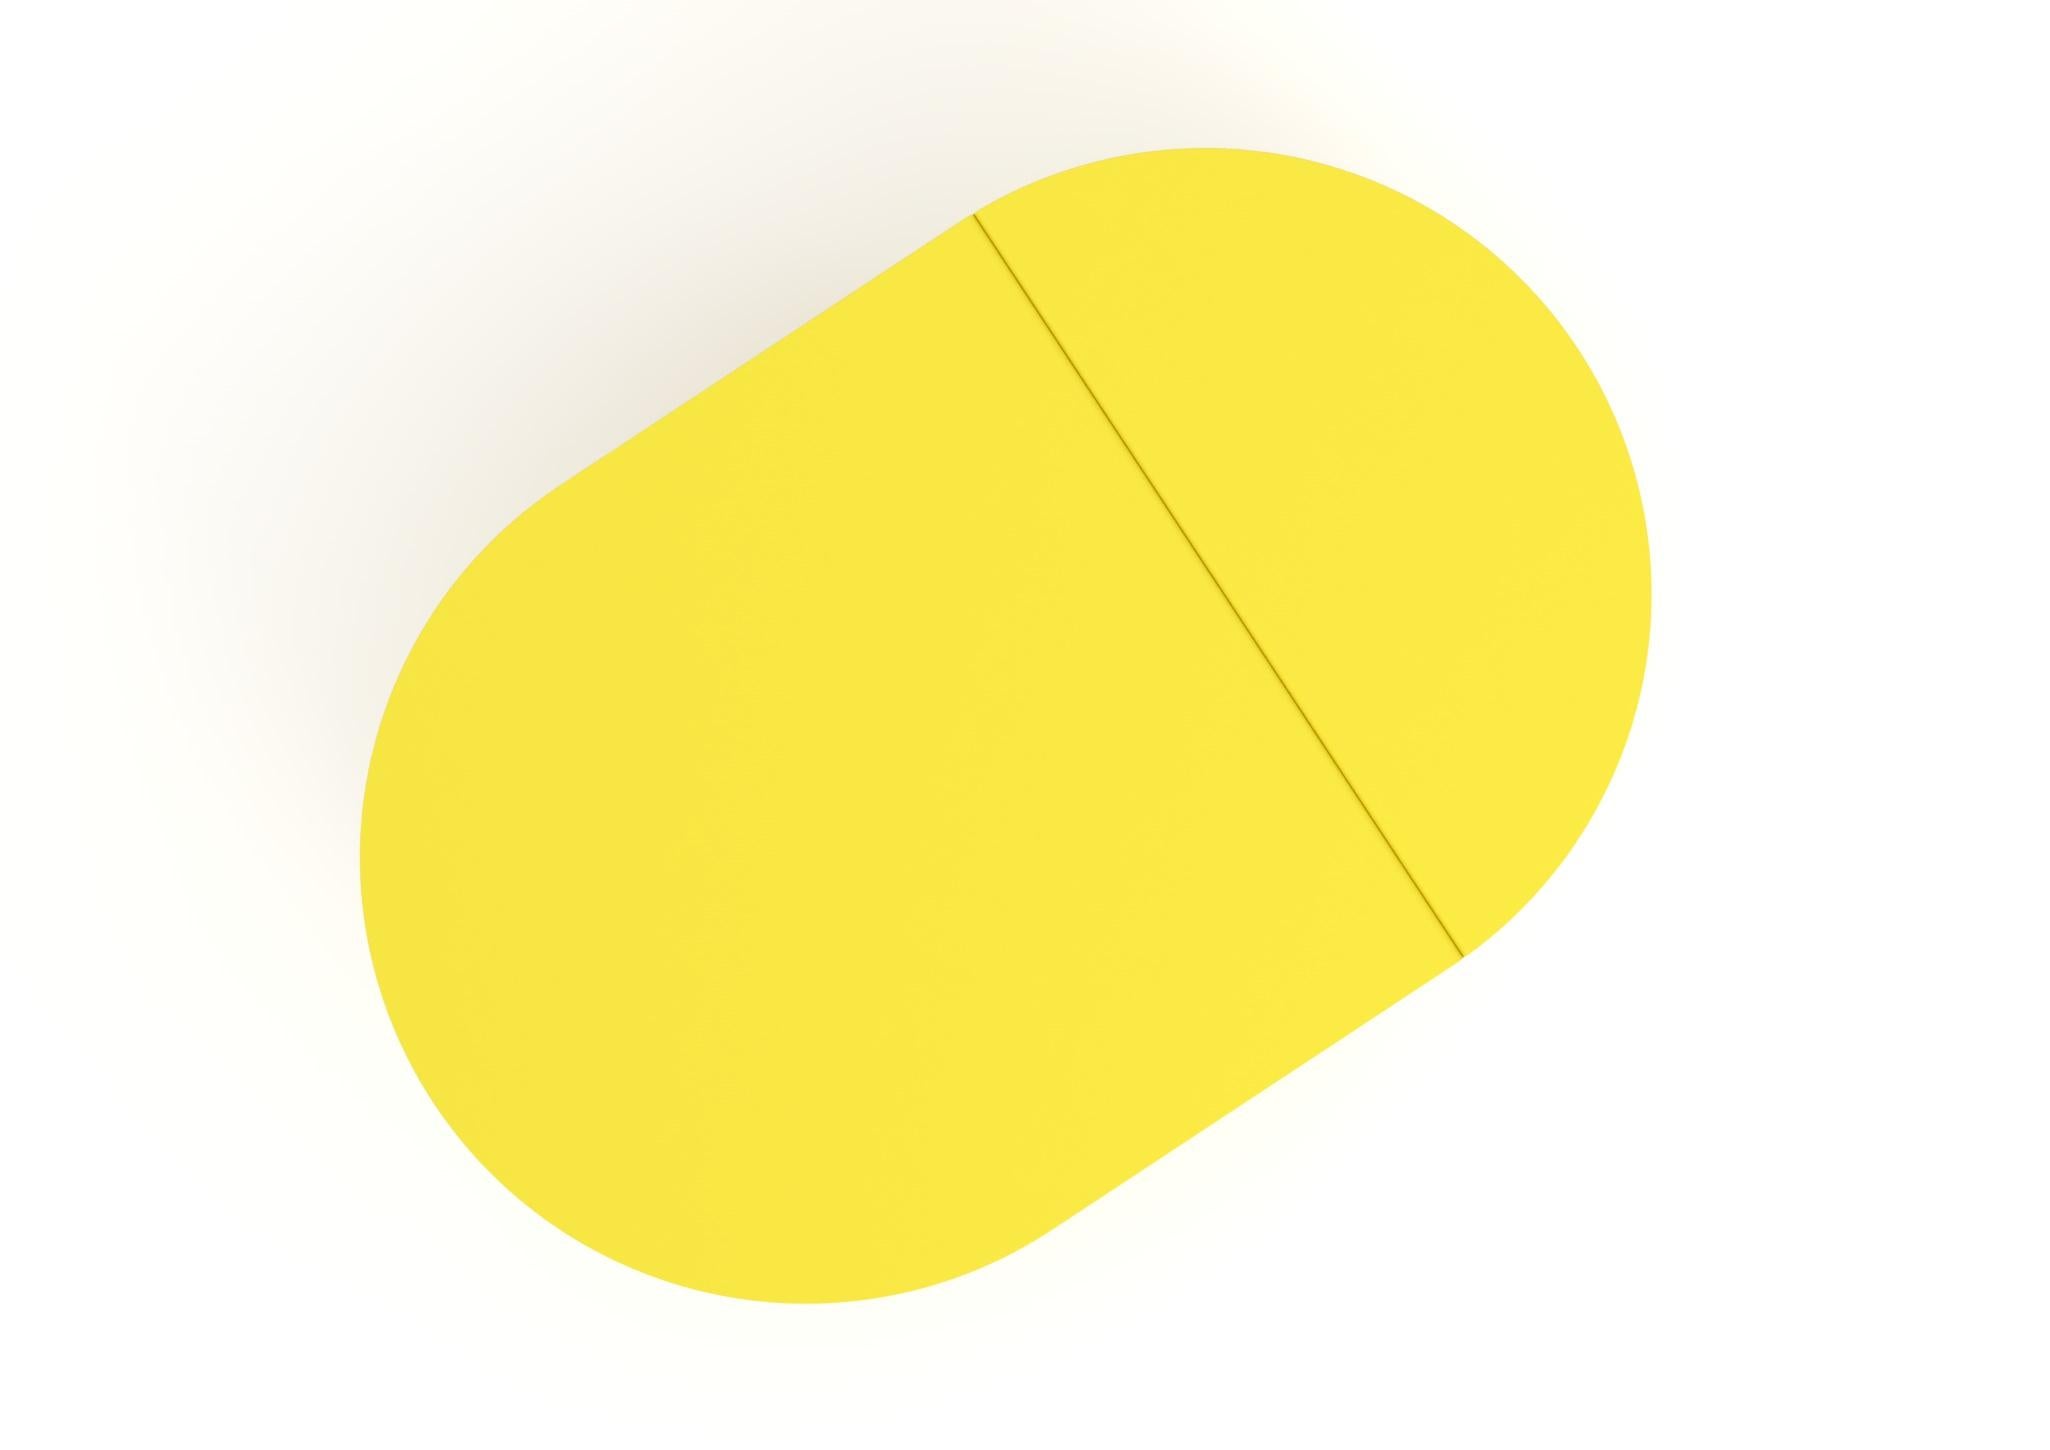 Colour, a Modern Oval Coffee Table, Ral 1016 - Sulfur Yellow, by Bas Vellekoop For Sale 4